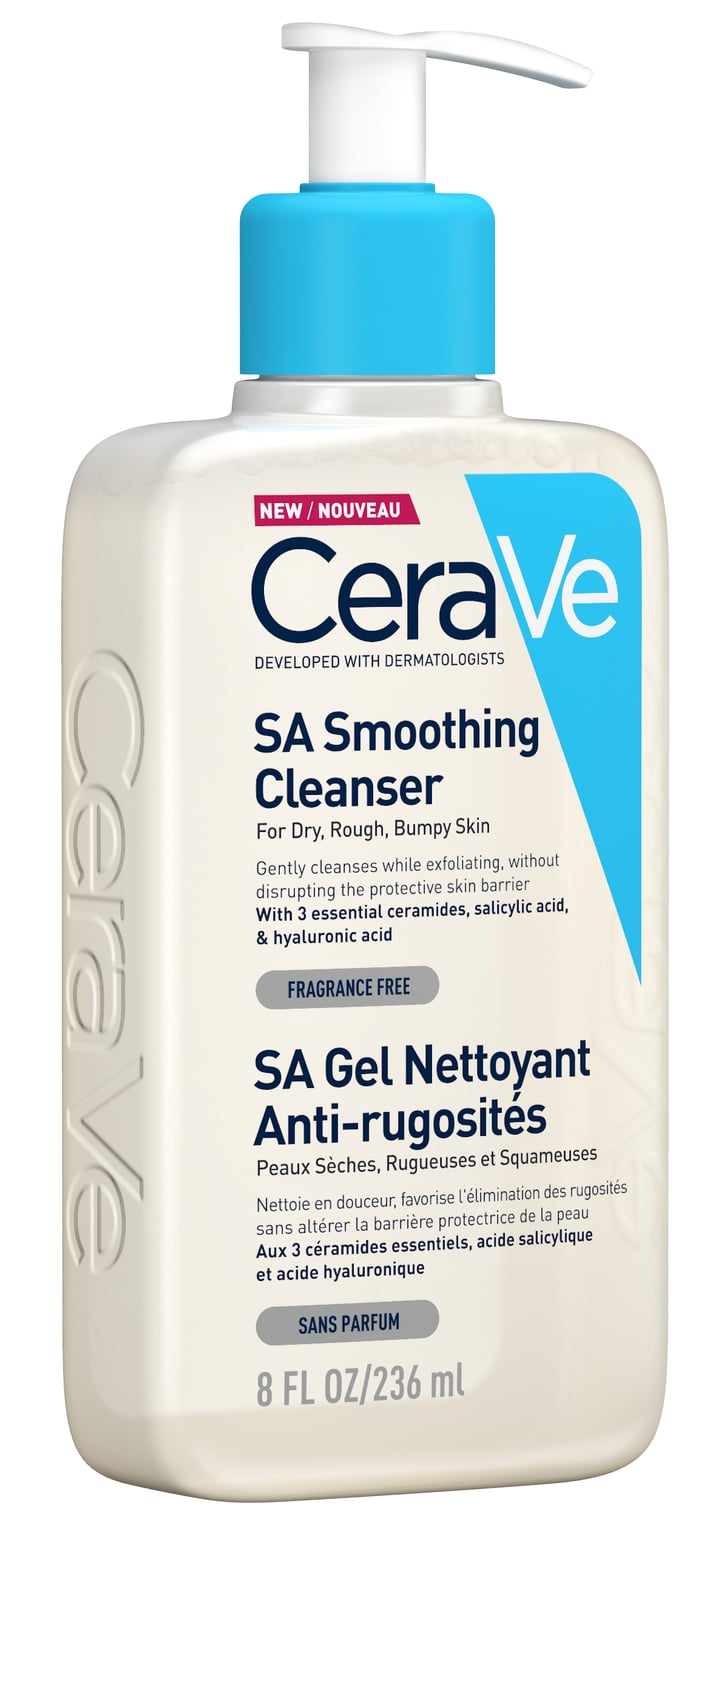 Cerave SA Smoothing Cleanser With Salicylic Acid The Best Salicylic Acid Cleansers For Oily